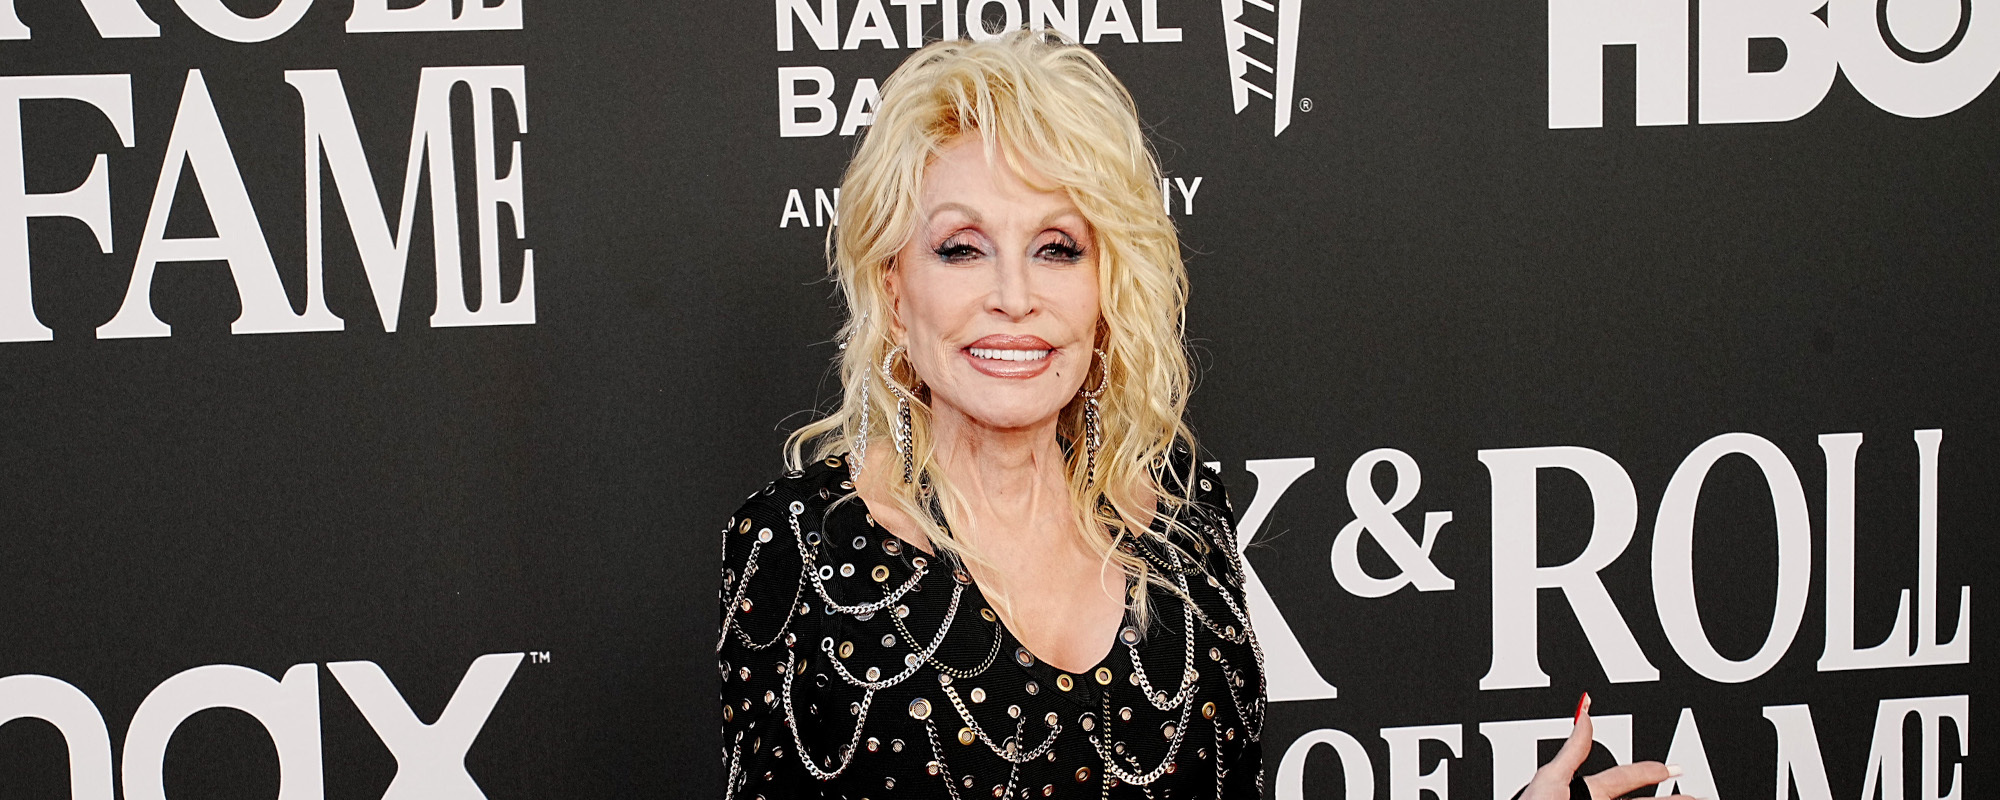 Dolly Parton Opens Up About Working With Paul McCartney and Ringo Starr